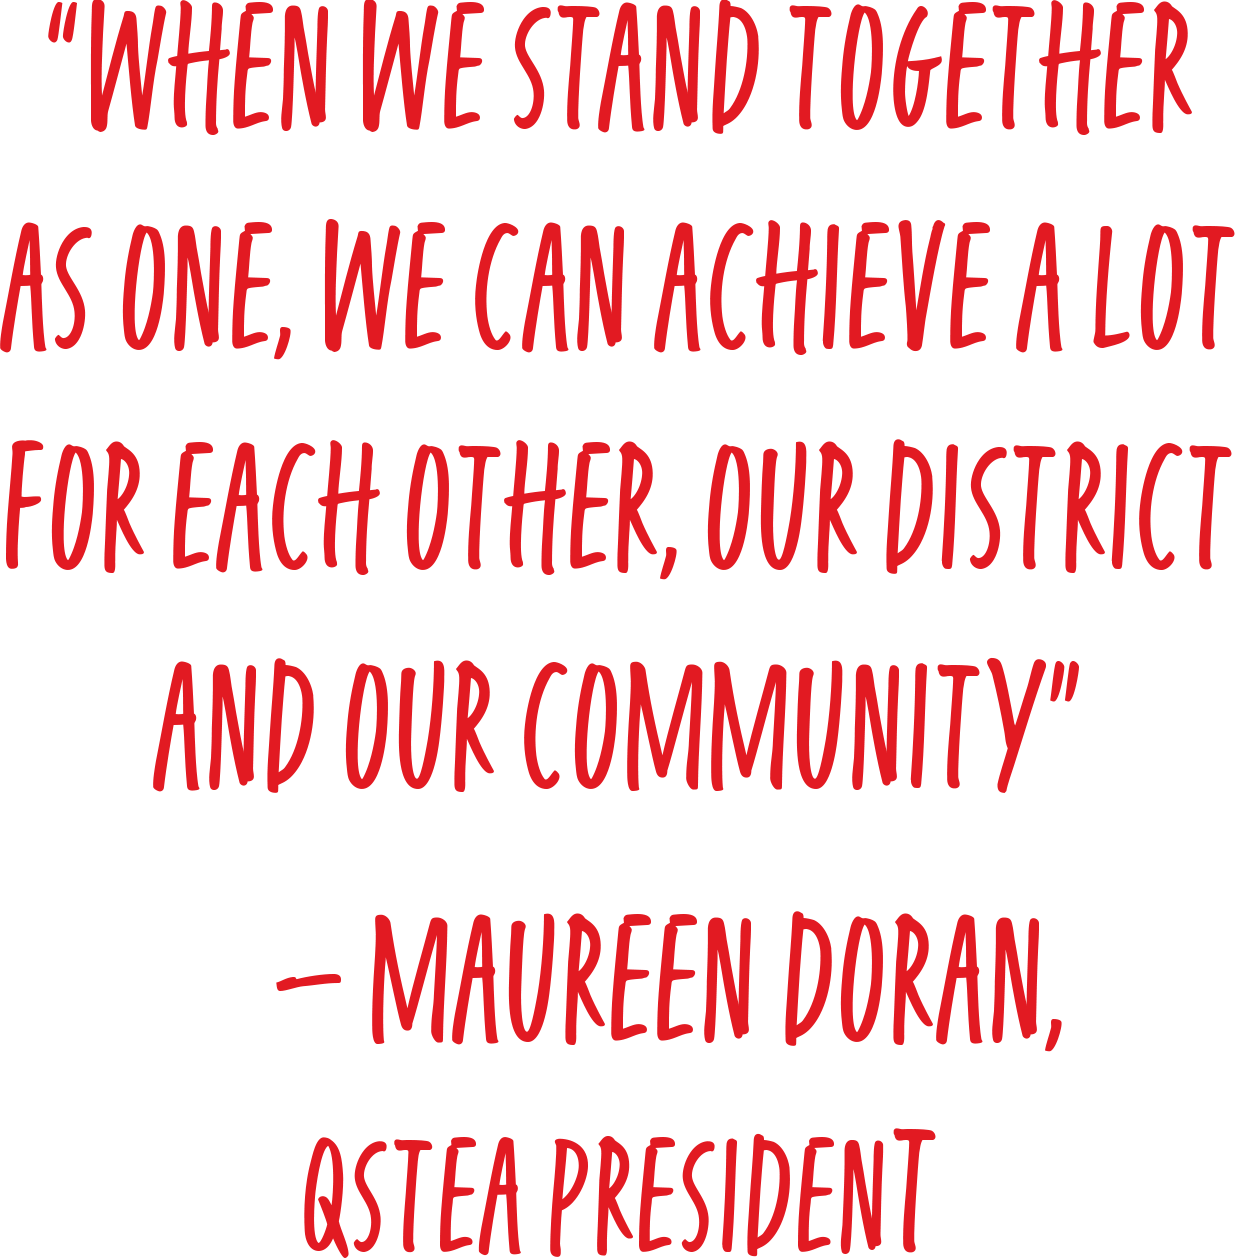 “when we stand together as one, we can achieve a lot for each other, our district and our community” – maureen doran, qstea president